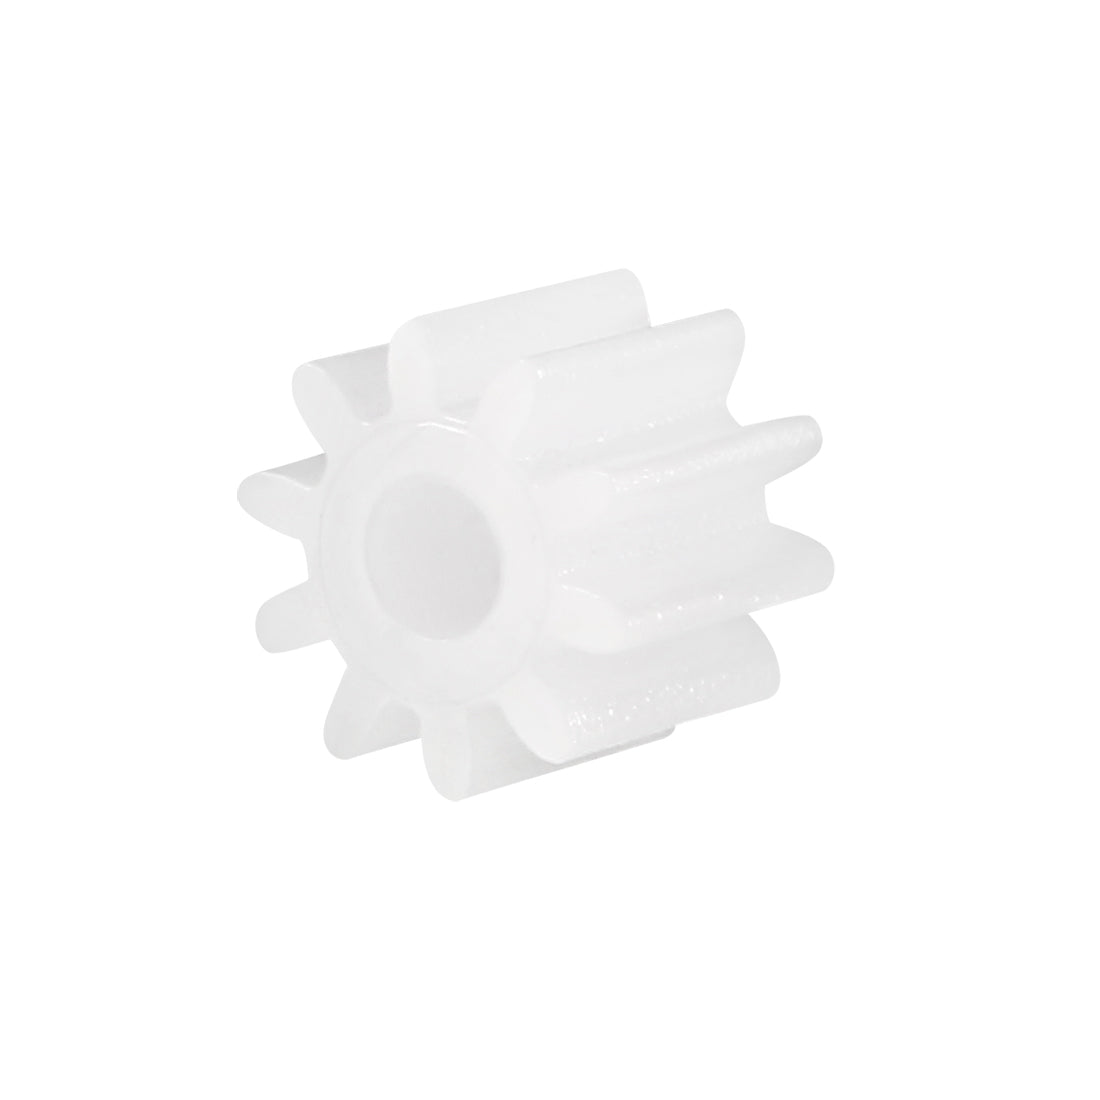 uxcell Uxcell 100Pcs,092A Plastic Gear Accessories with 9 Teeth for DIY Car Robot Motor